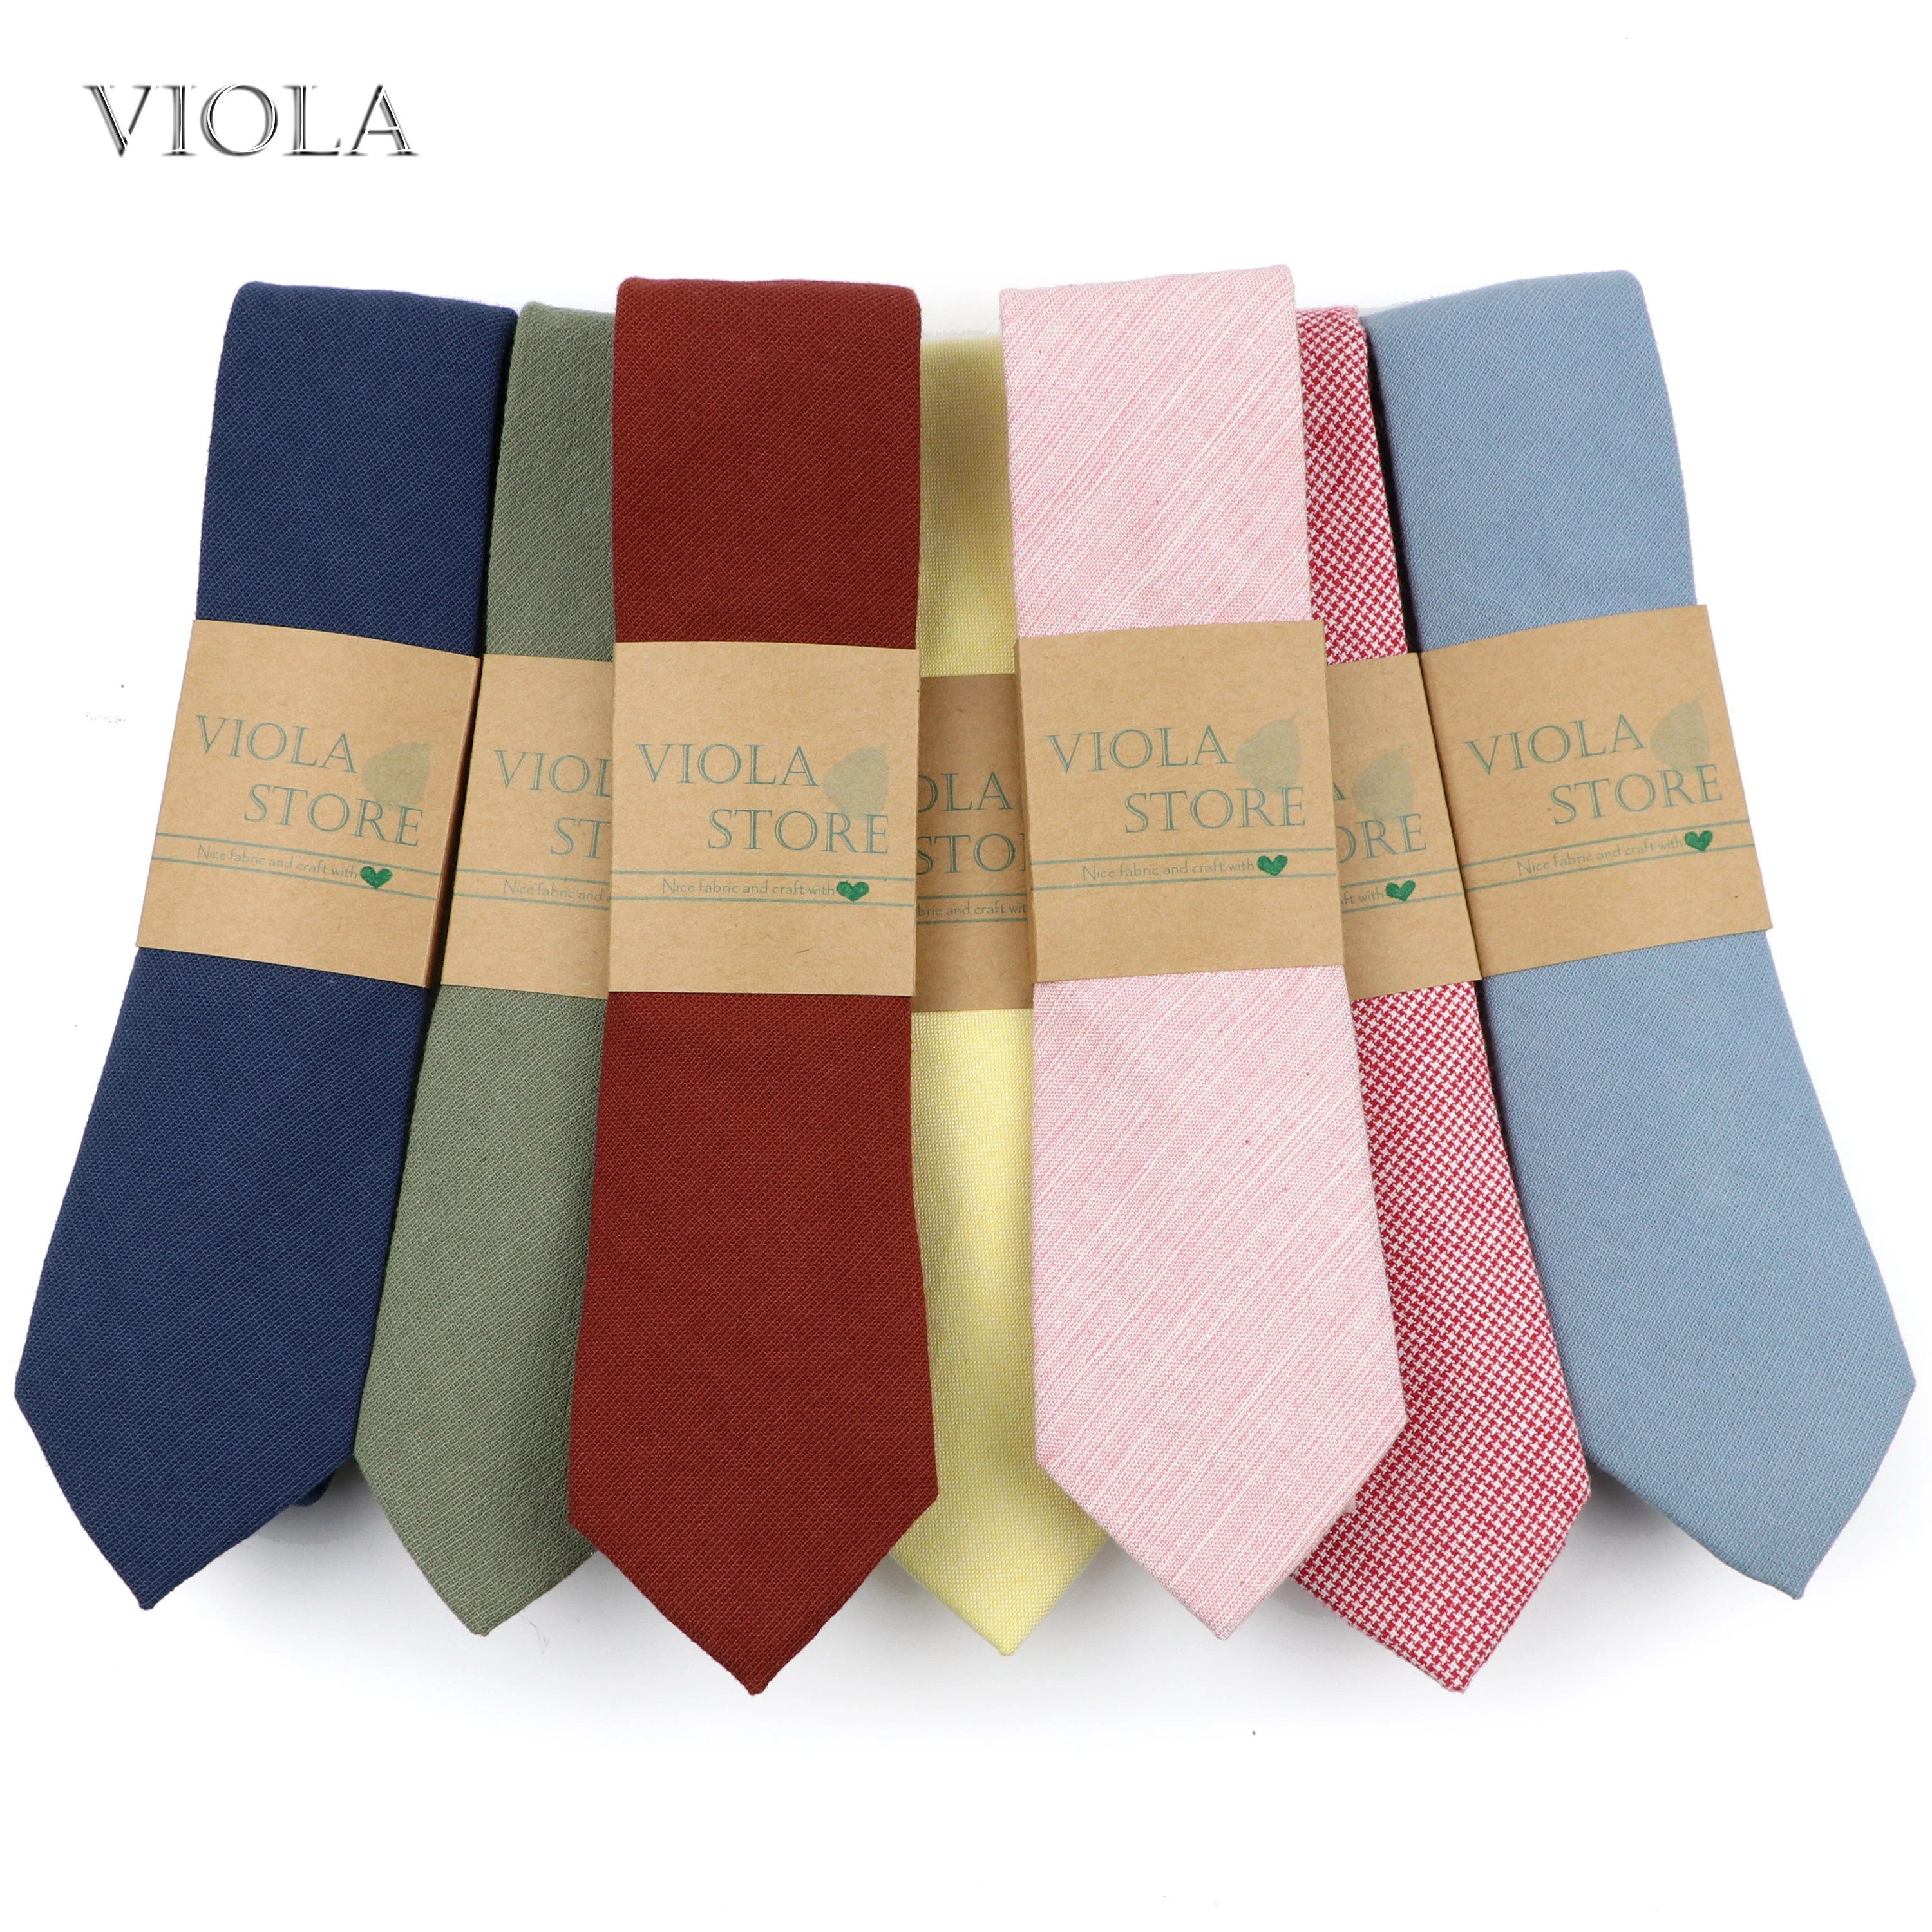 New Colorful Solid 100%Cotton Neck Tie 6cm Skinny Pink Sky Blue Dress Wedding Party Tuxedo Tie Gift BowTie Cravat Mens Accessory